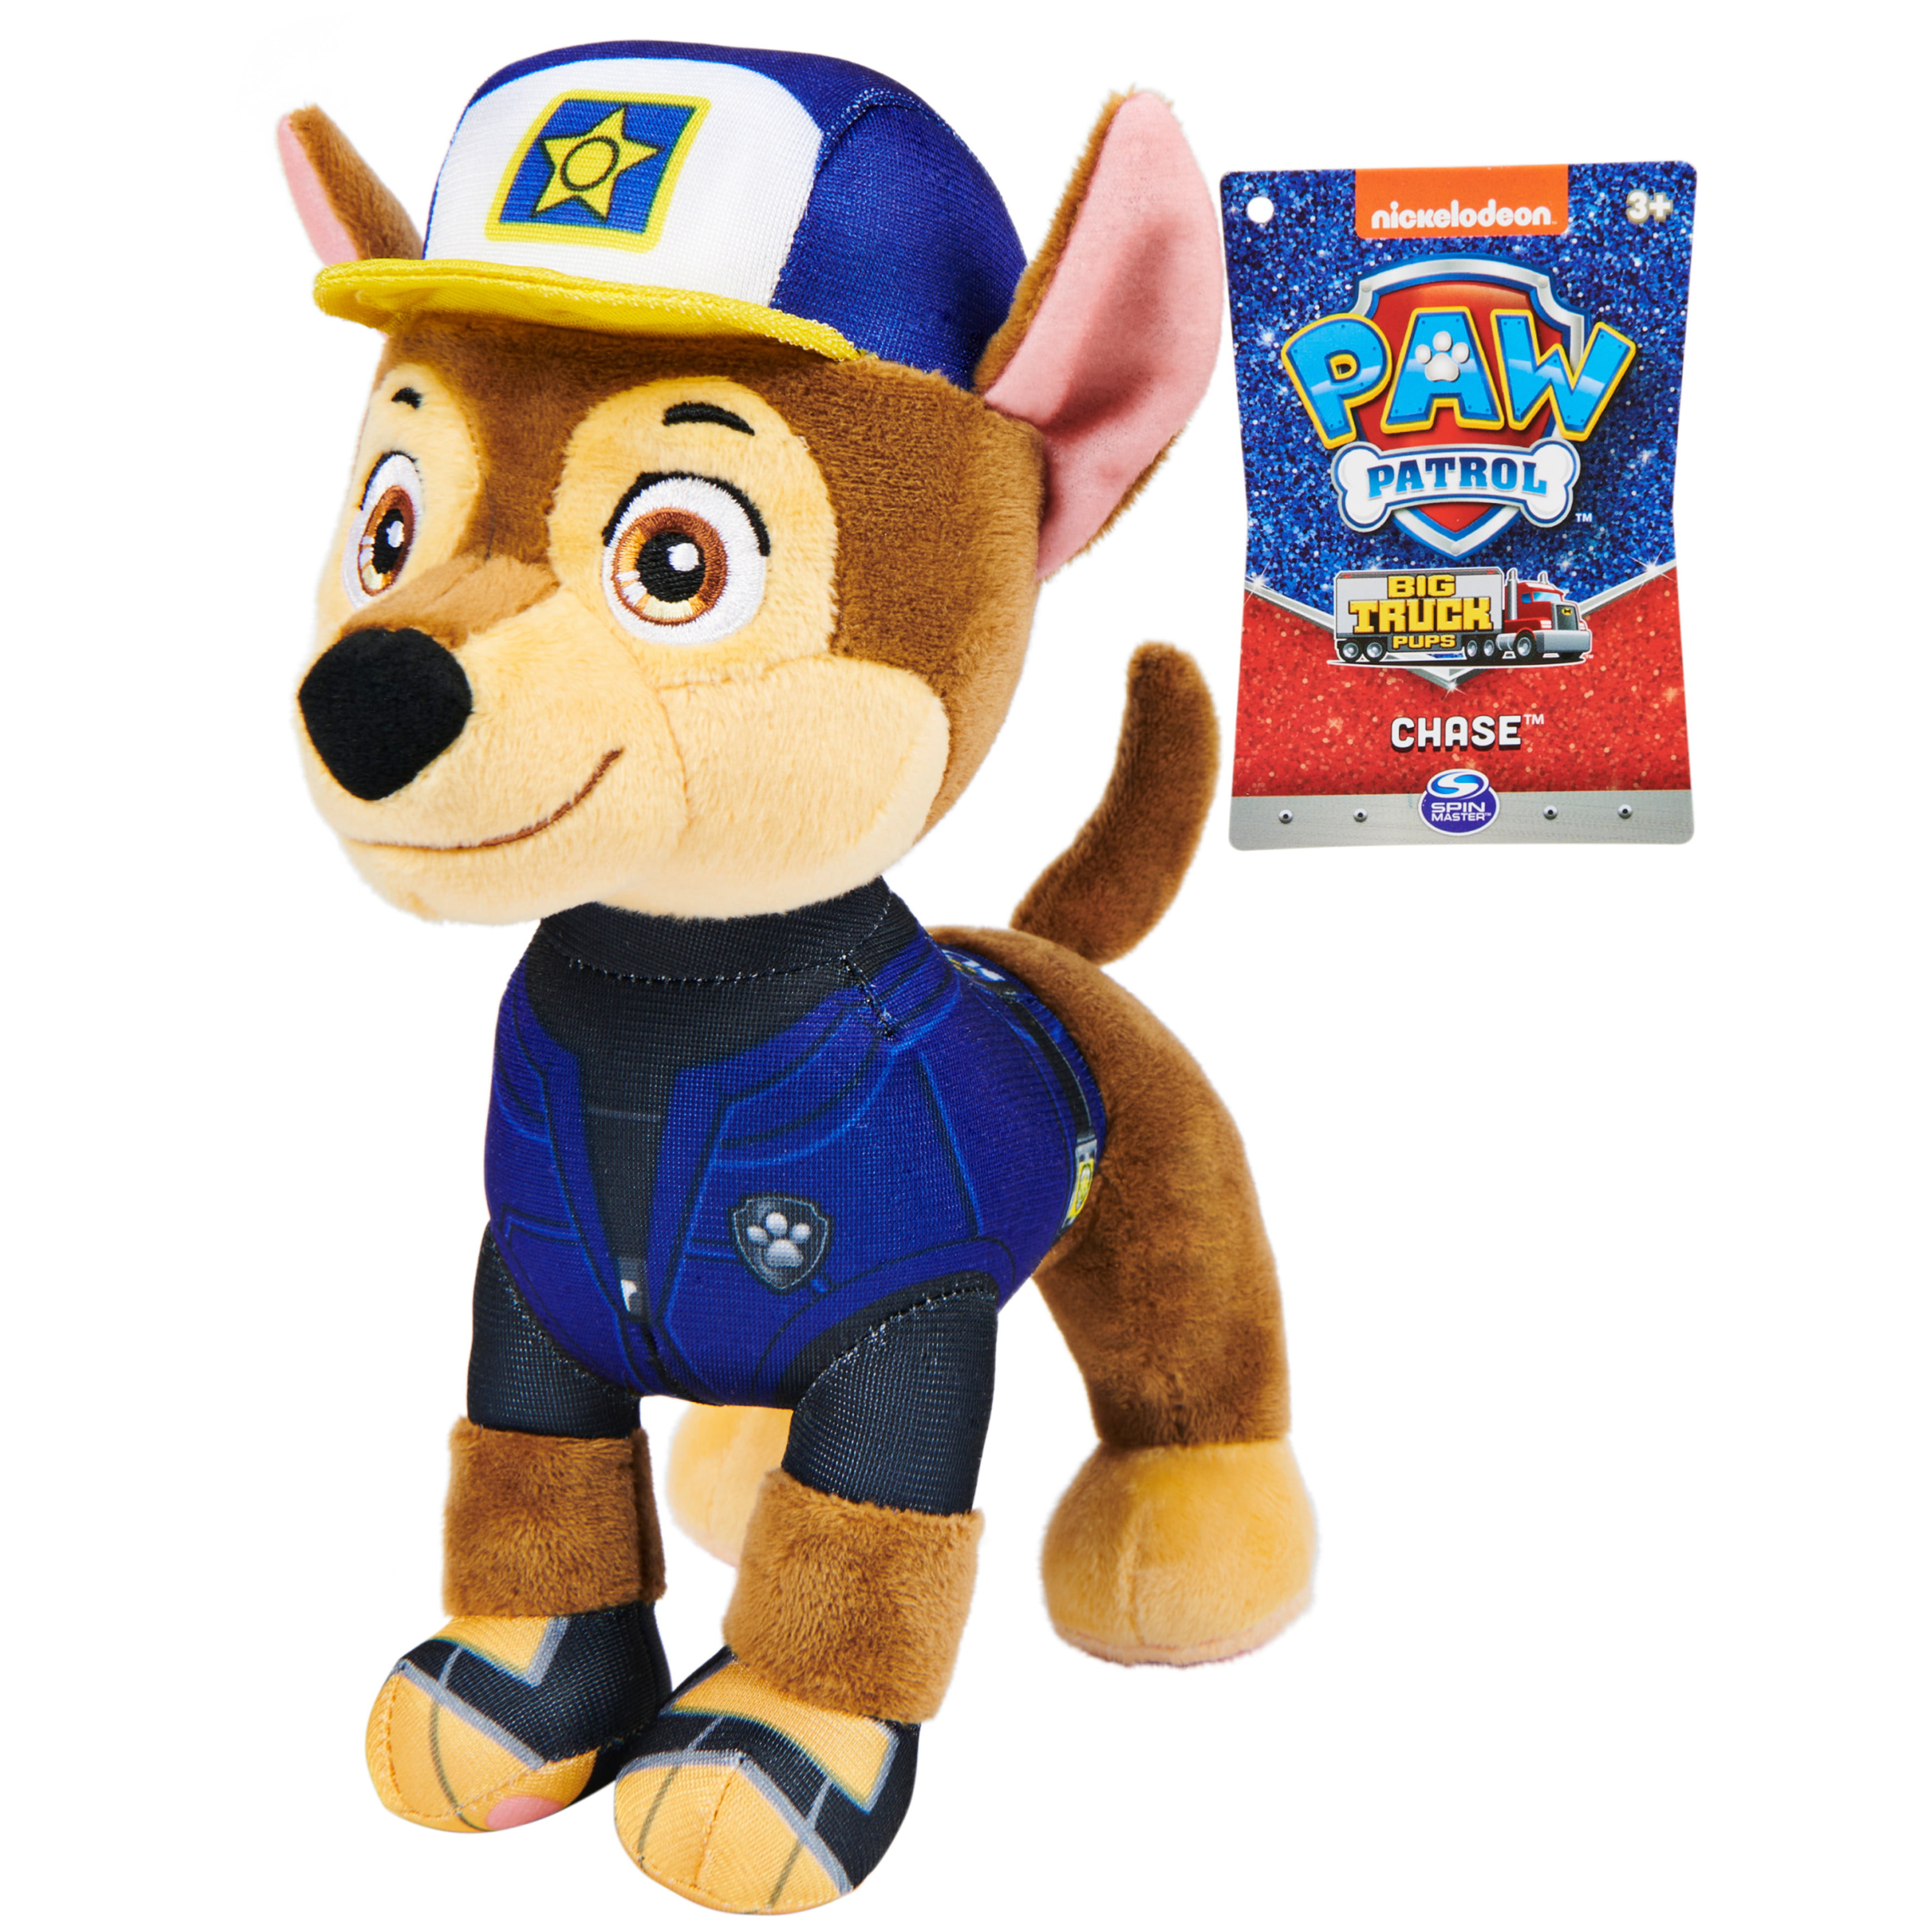 PAW Patrol, Big Truck Pup Chase, Stuffed Animal, 8-inch Plush Kids Toys for  Ages 3 and up 